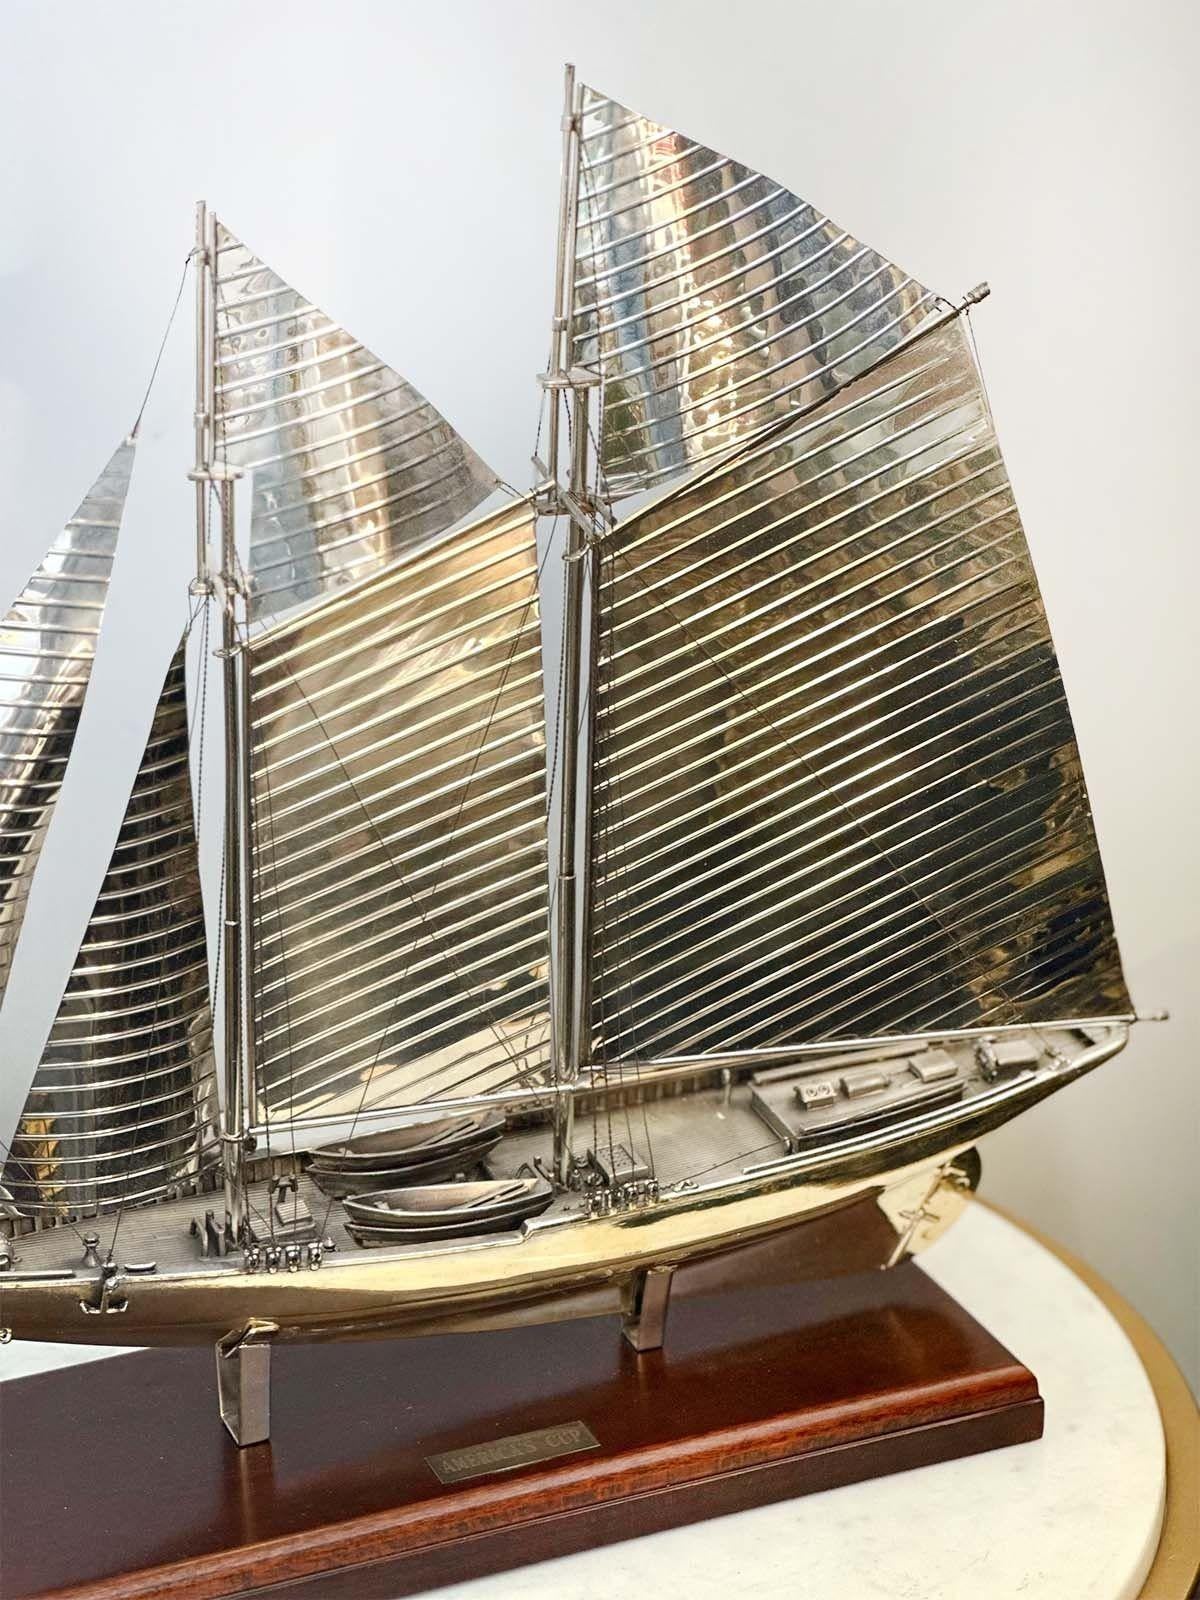 Rare 925 sterling silver boat award of America's Cup supported on a wooden base by Scully & Scully. Hand-made in New York, 20th Century.
*Signed on the silver by Scully & Scully 
Dimensions:
16.5